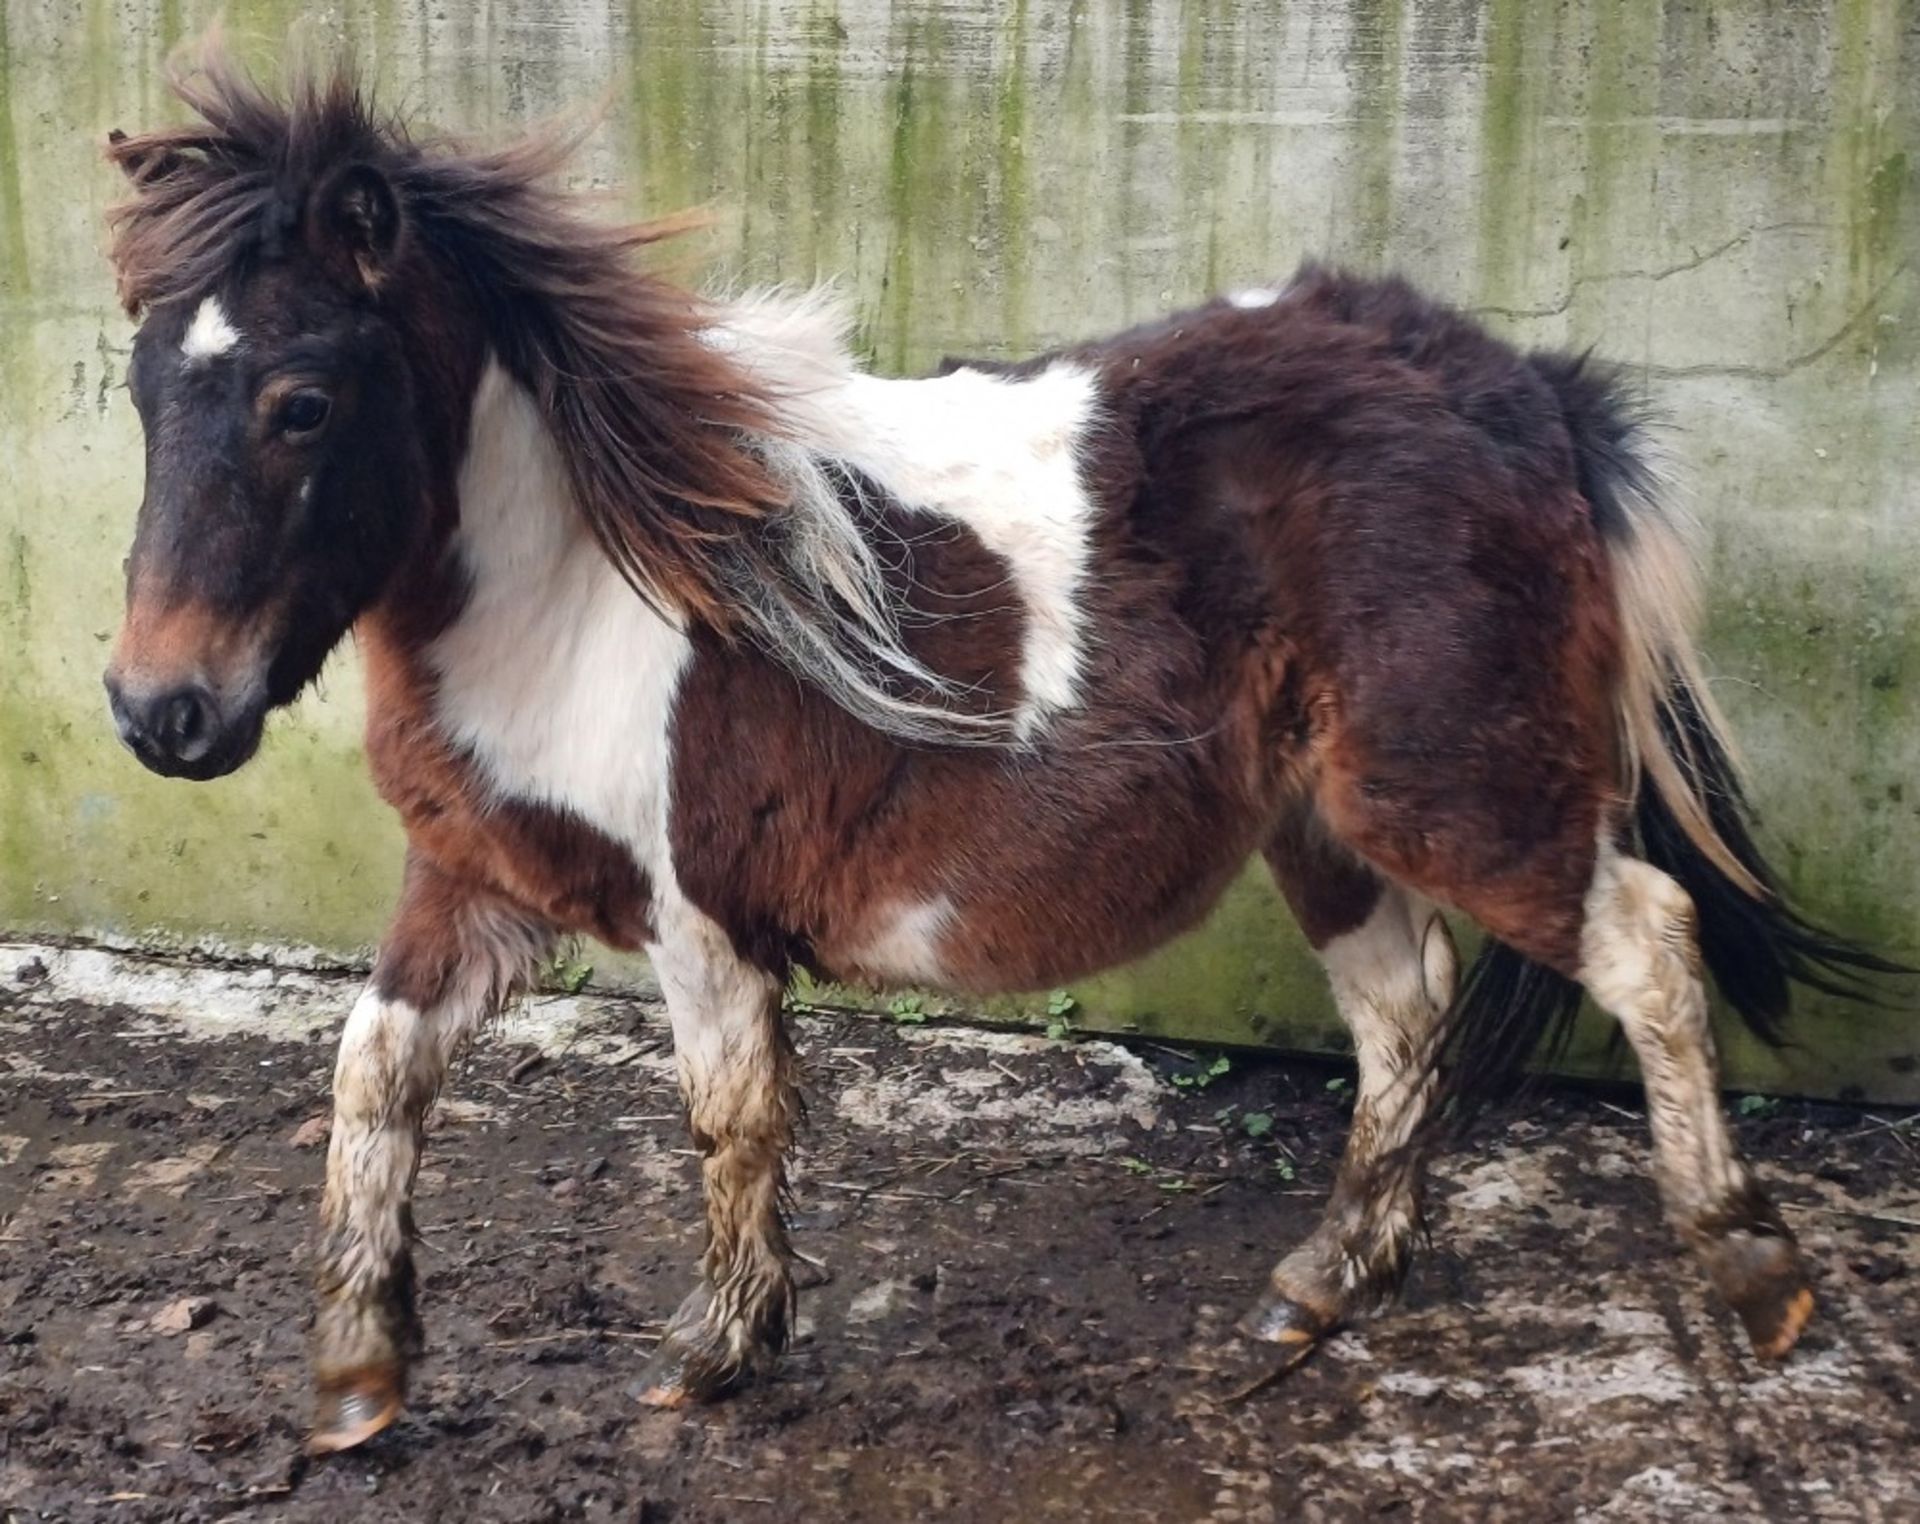 'GODSWORTHY SPICE' DARTMOOR HILL PONY SKEWBALD COLT APPROX 18 MONTHS OLD - Image 7 of 12